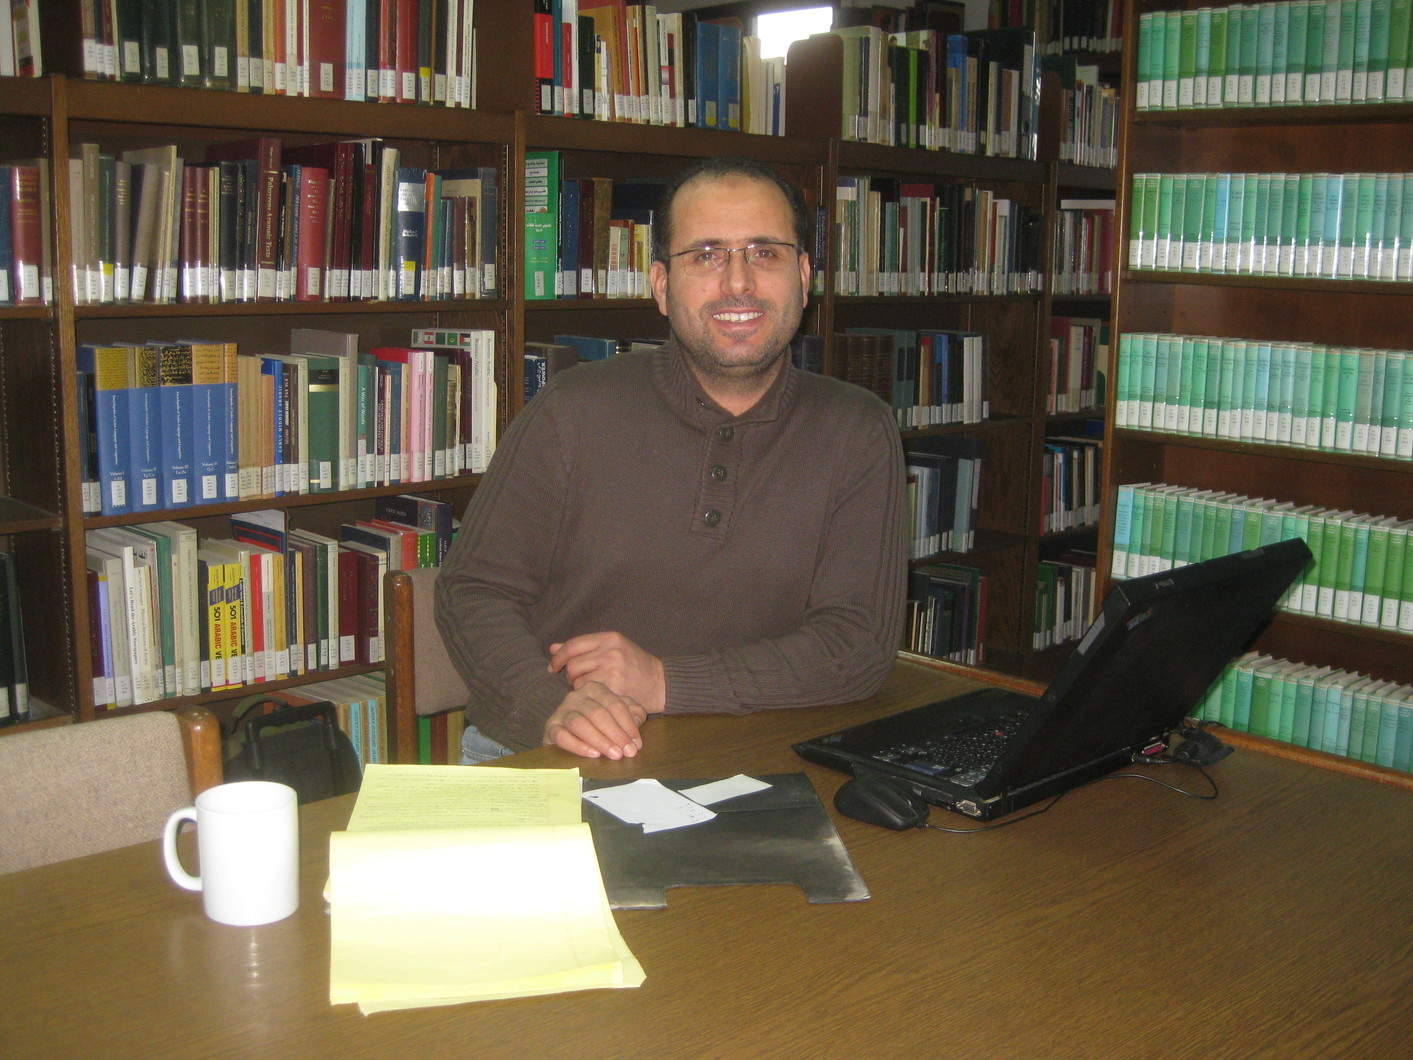 A fixture of ACOR and the ACOR Library through the years, Jordanian archaeologist Zakariya Na’imat is now working to complete a Ph.D. in Islamic Archaeology at the University of Bonn. Photo by Barbara Porter.